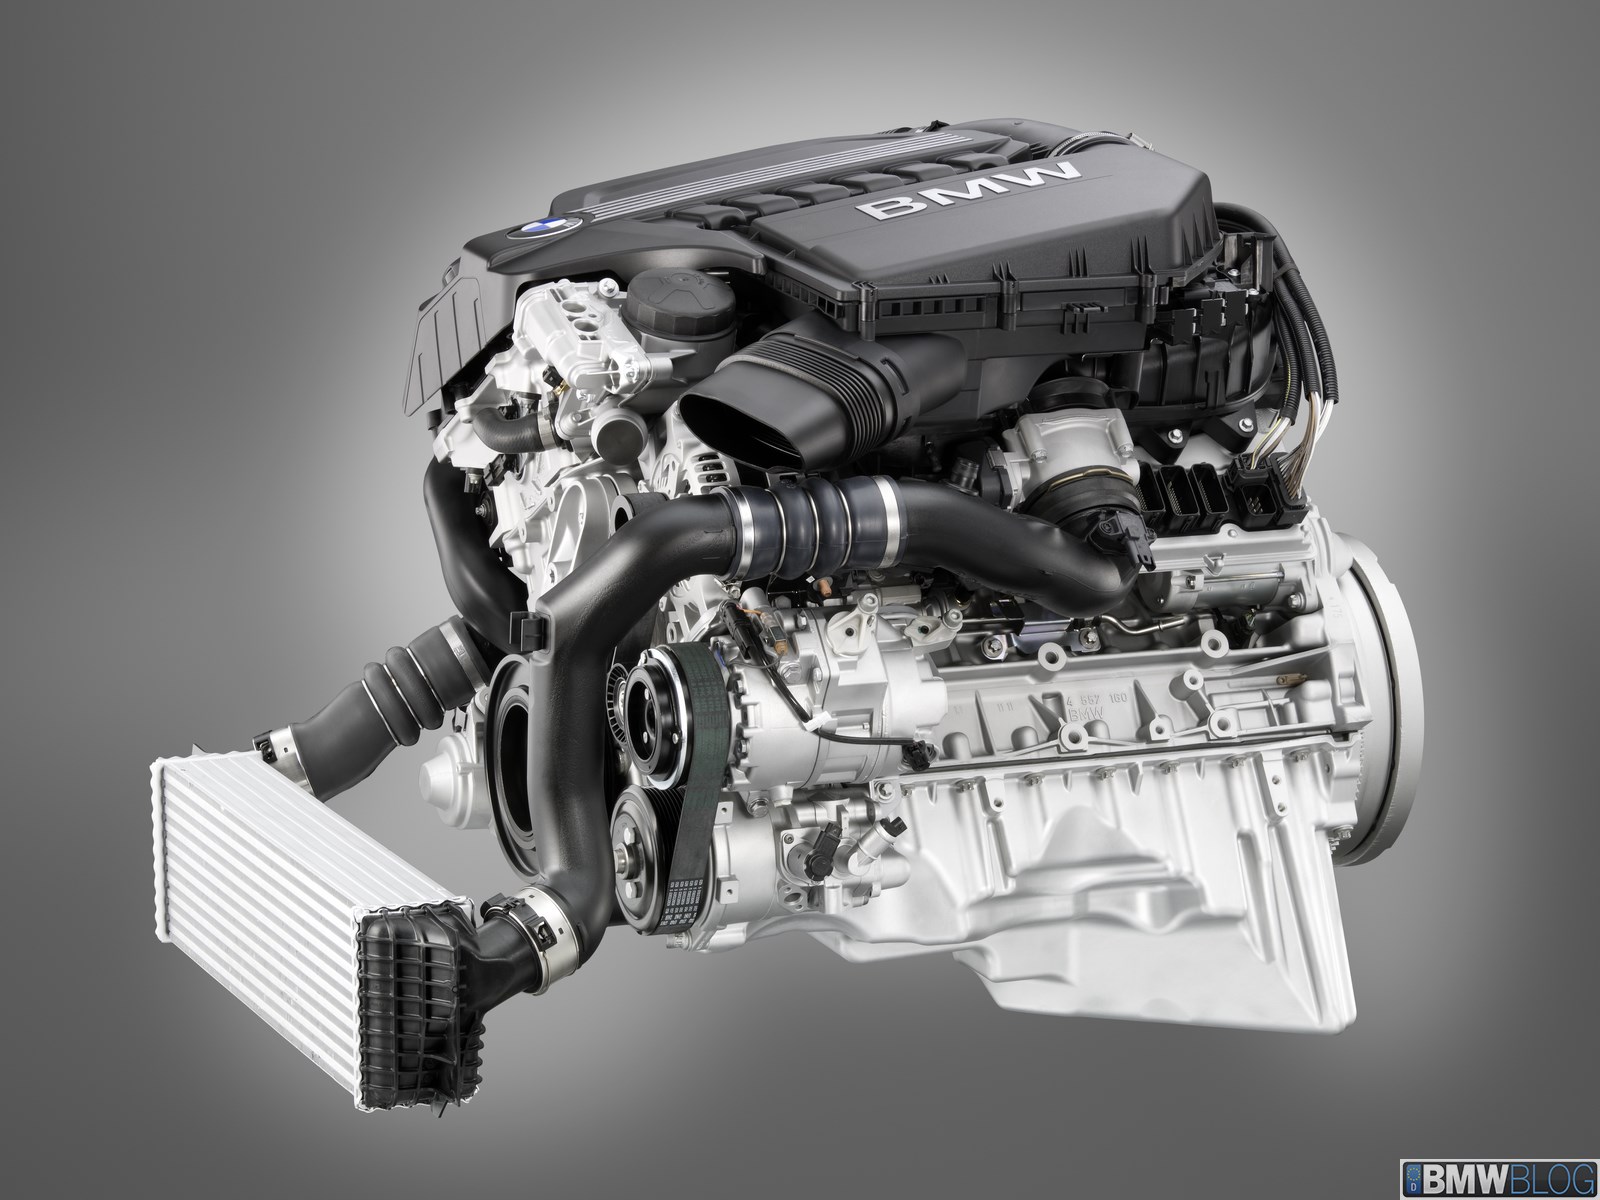 BMW TwinPower Turbo Technology Again Takes Two Spots on